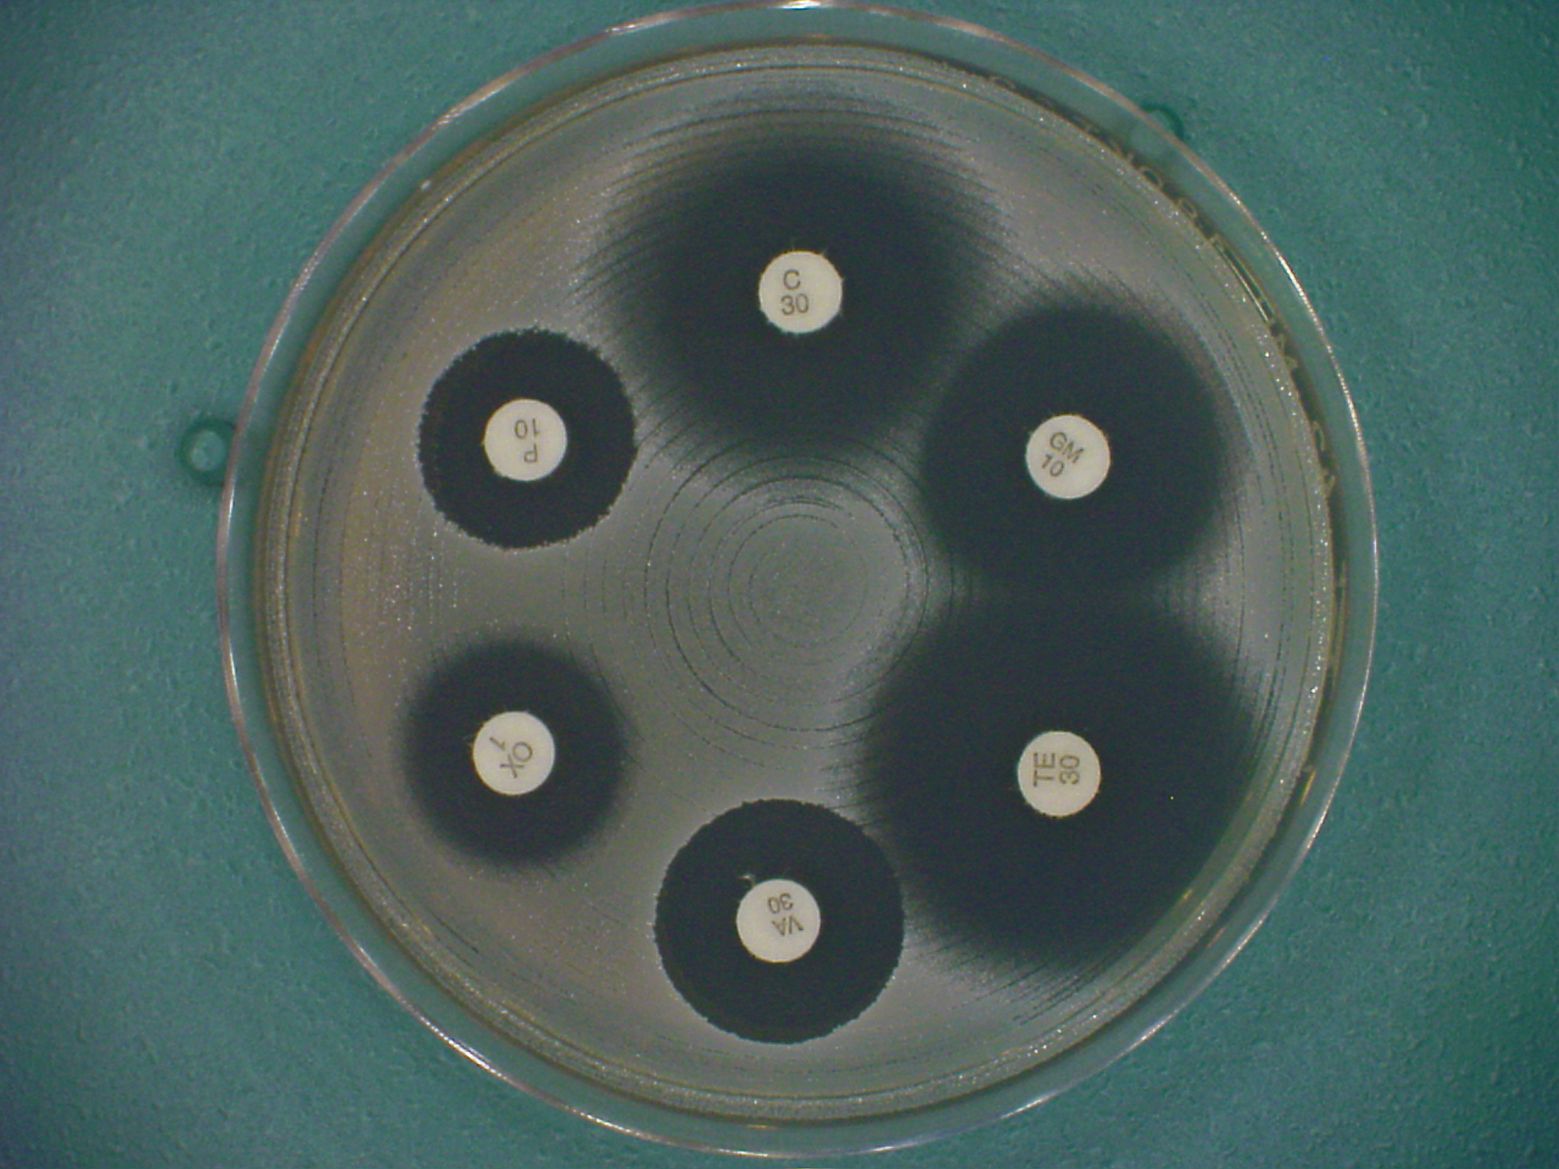 Disk diffusion plate